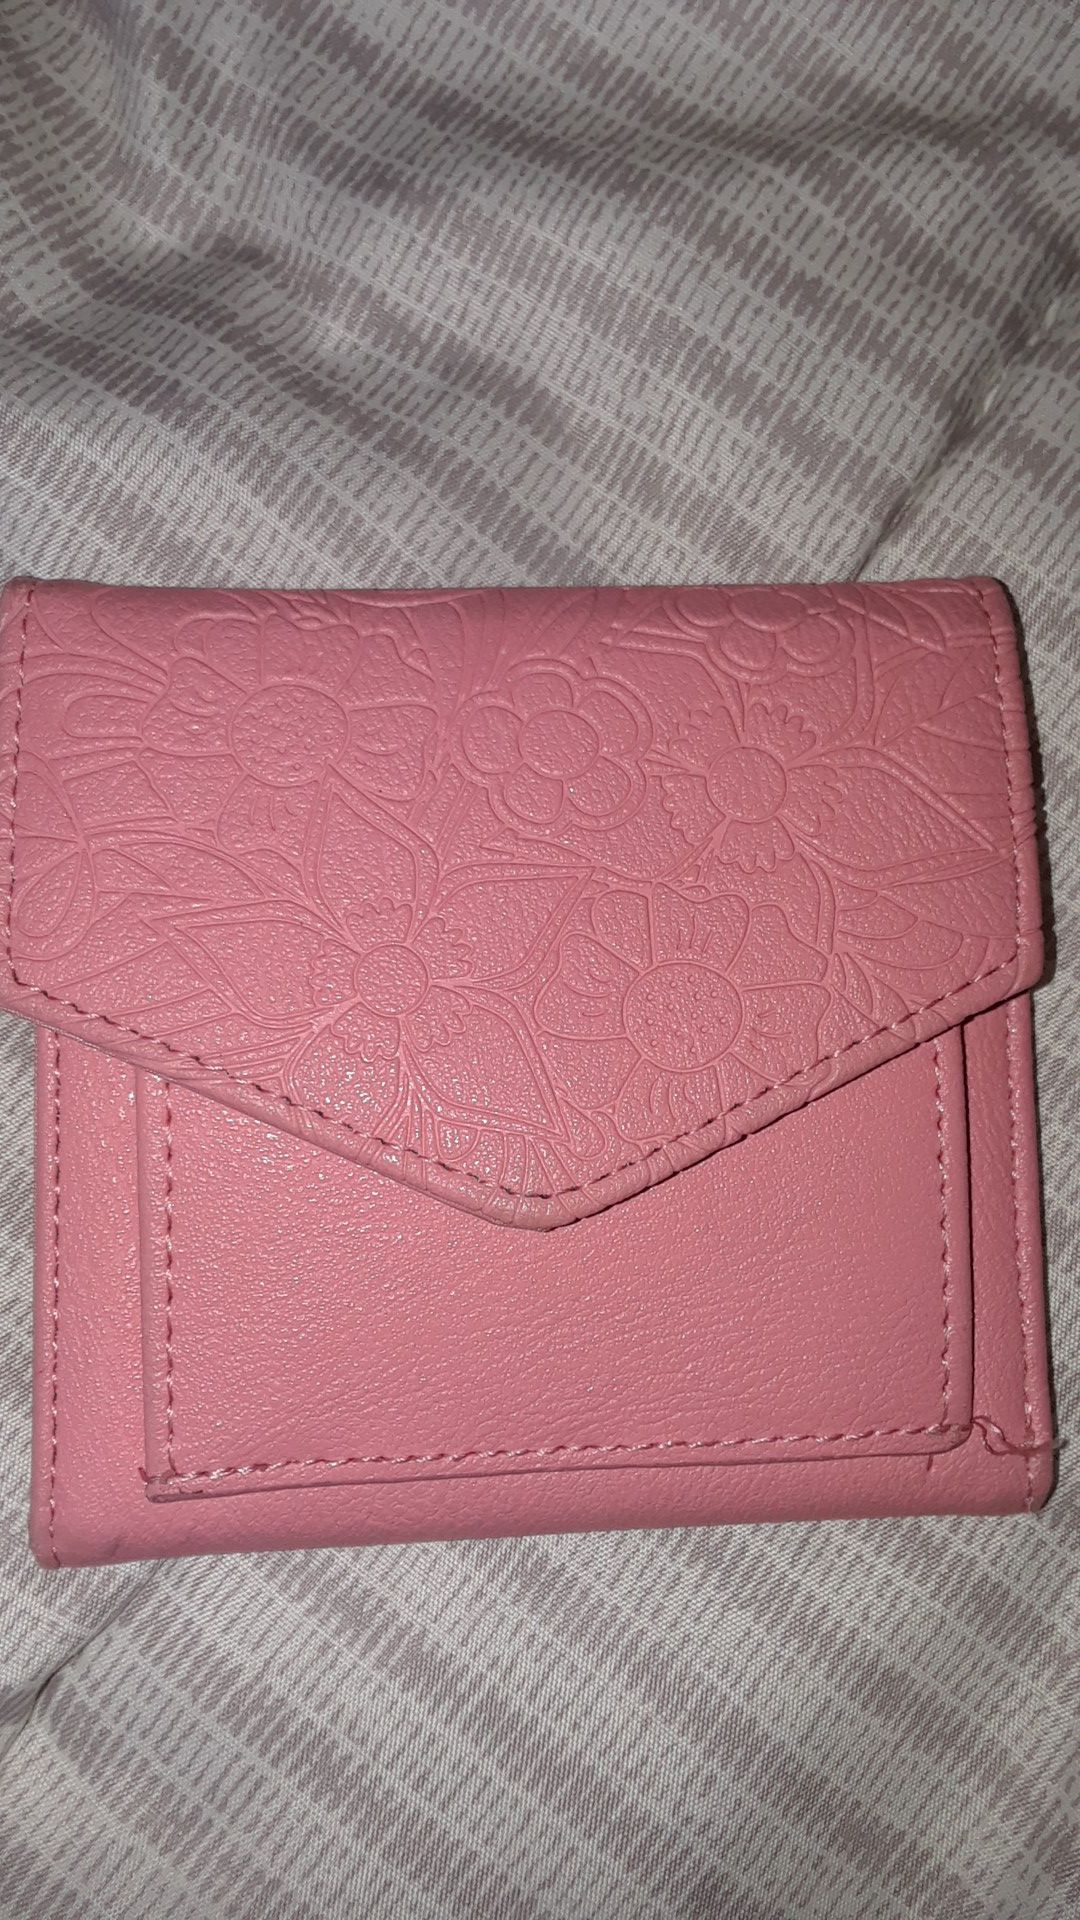 Pink small foldable wallet $3 firm